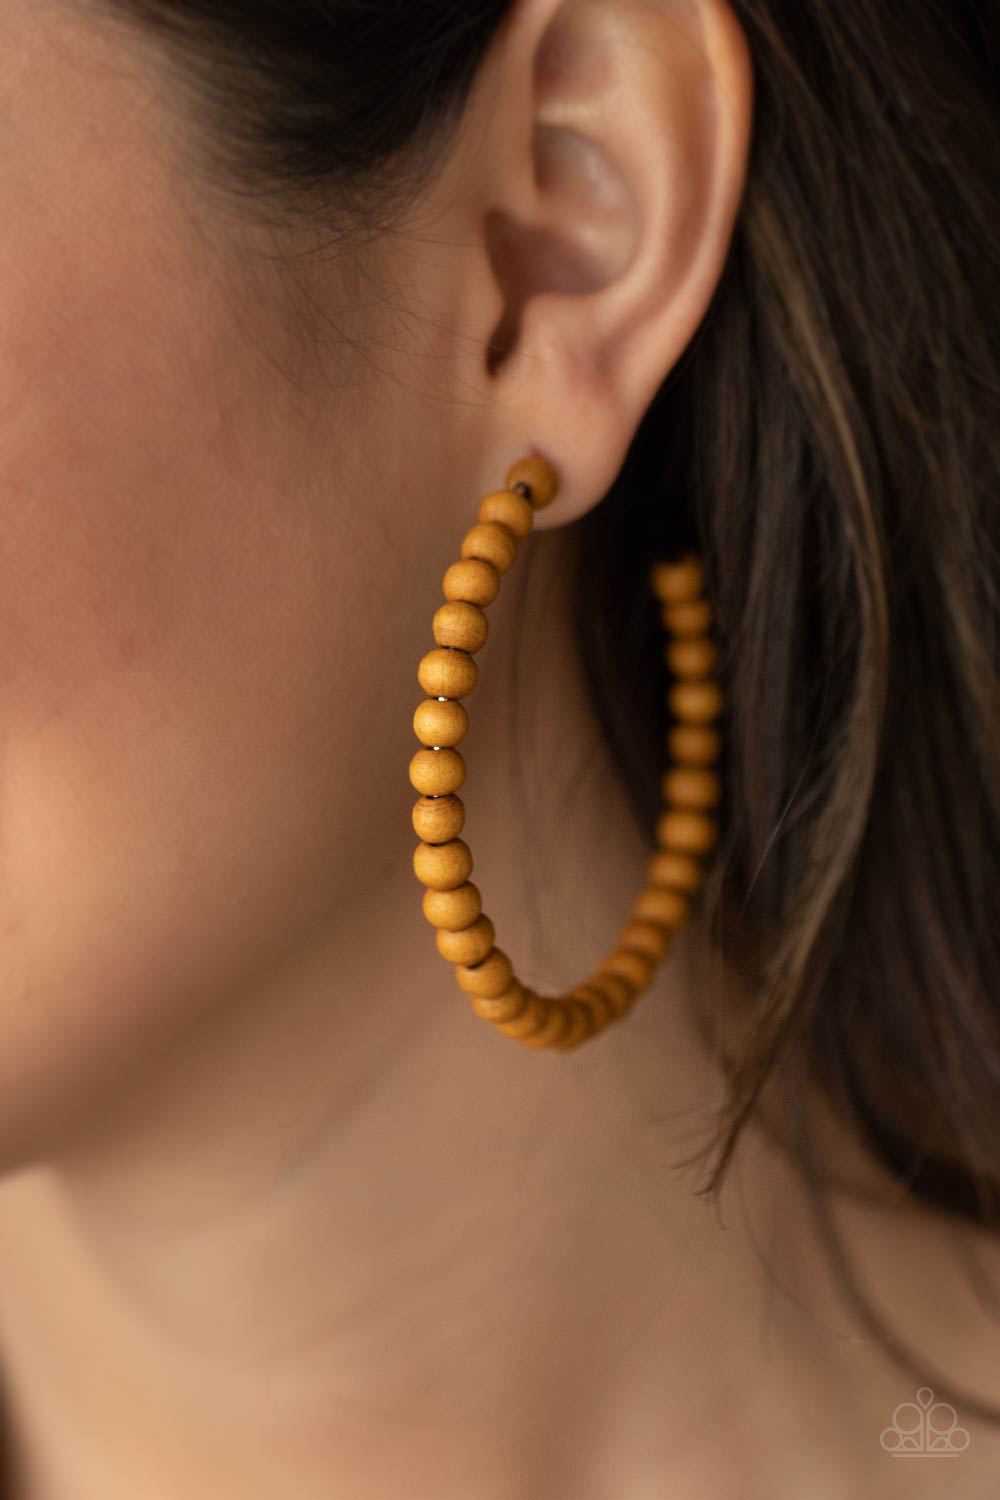 Should Have, Could Have, WOOD Have Brown Hoop Earrings